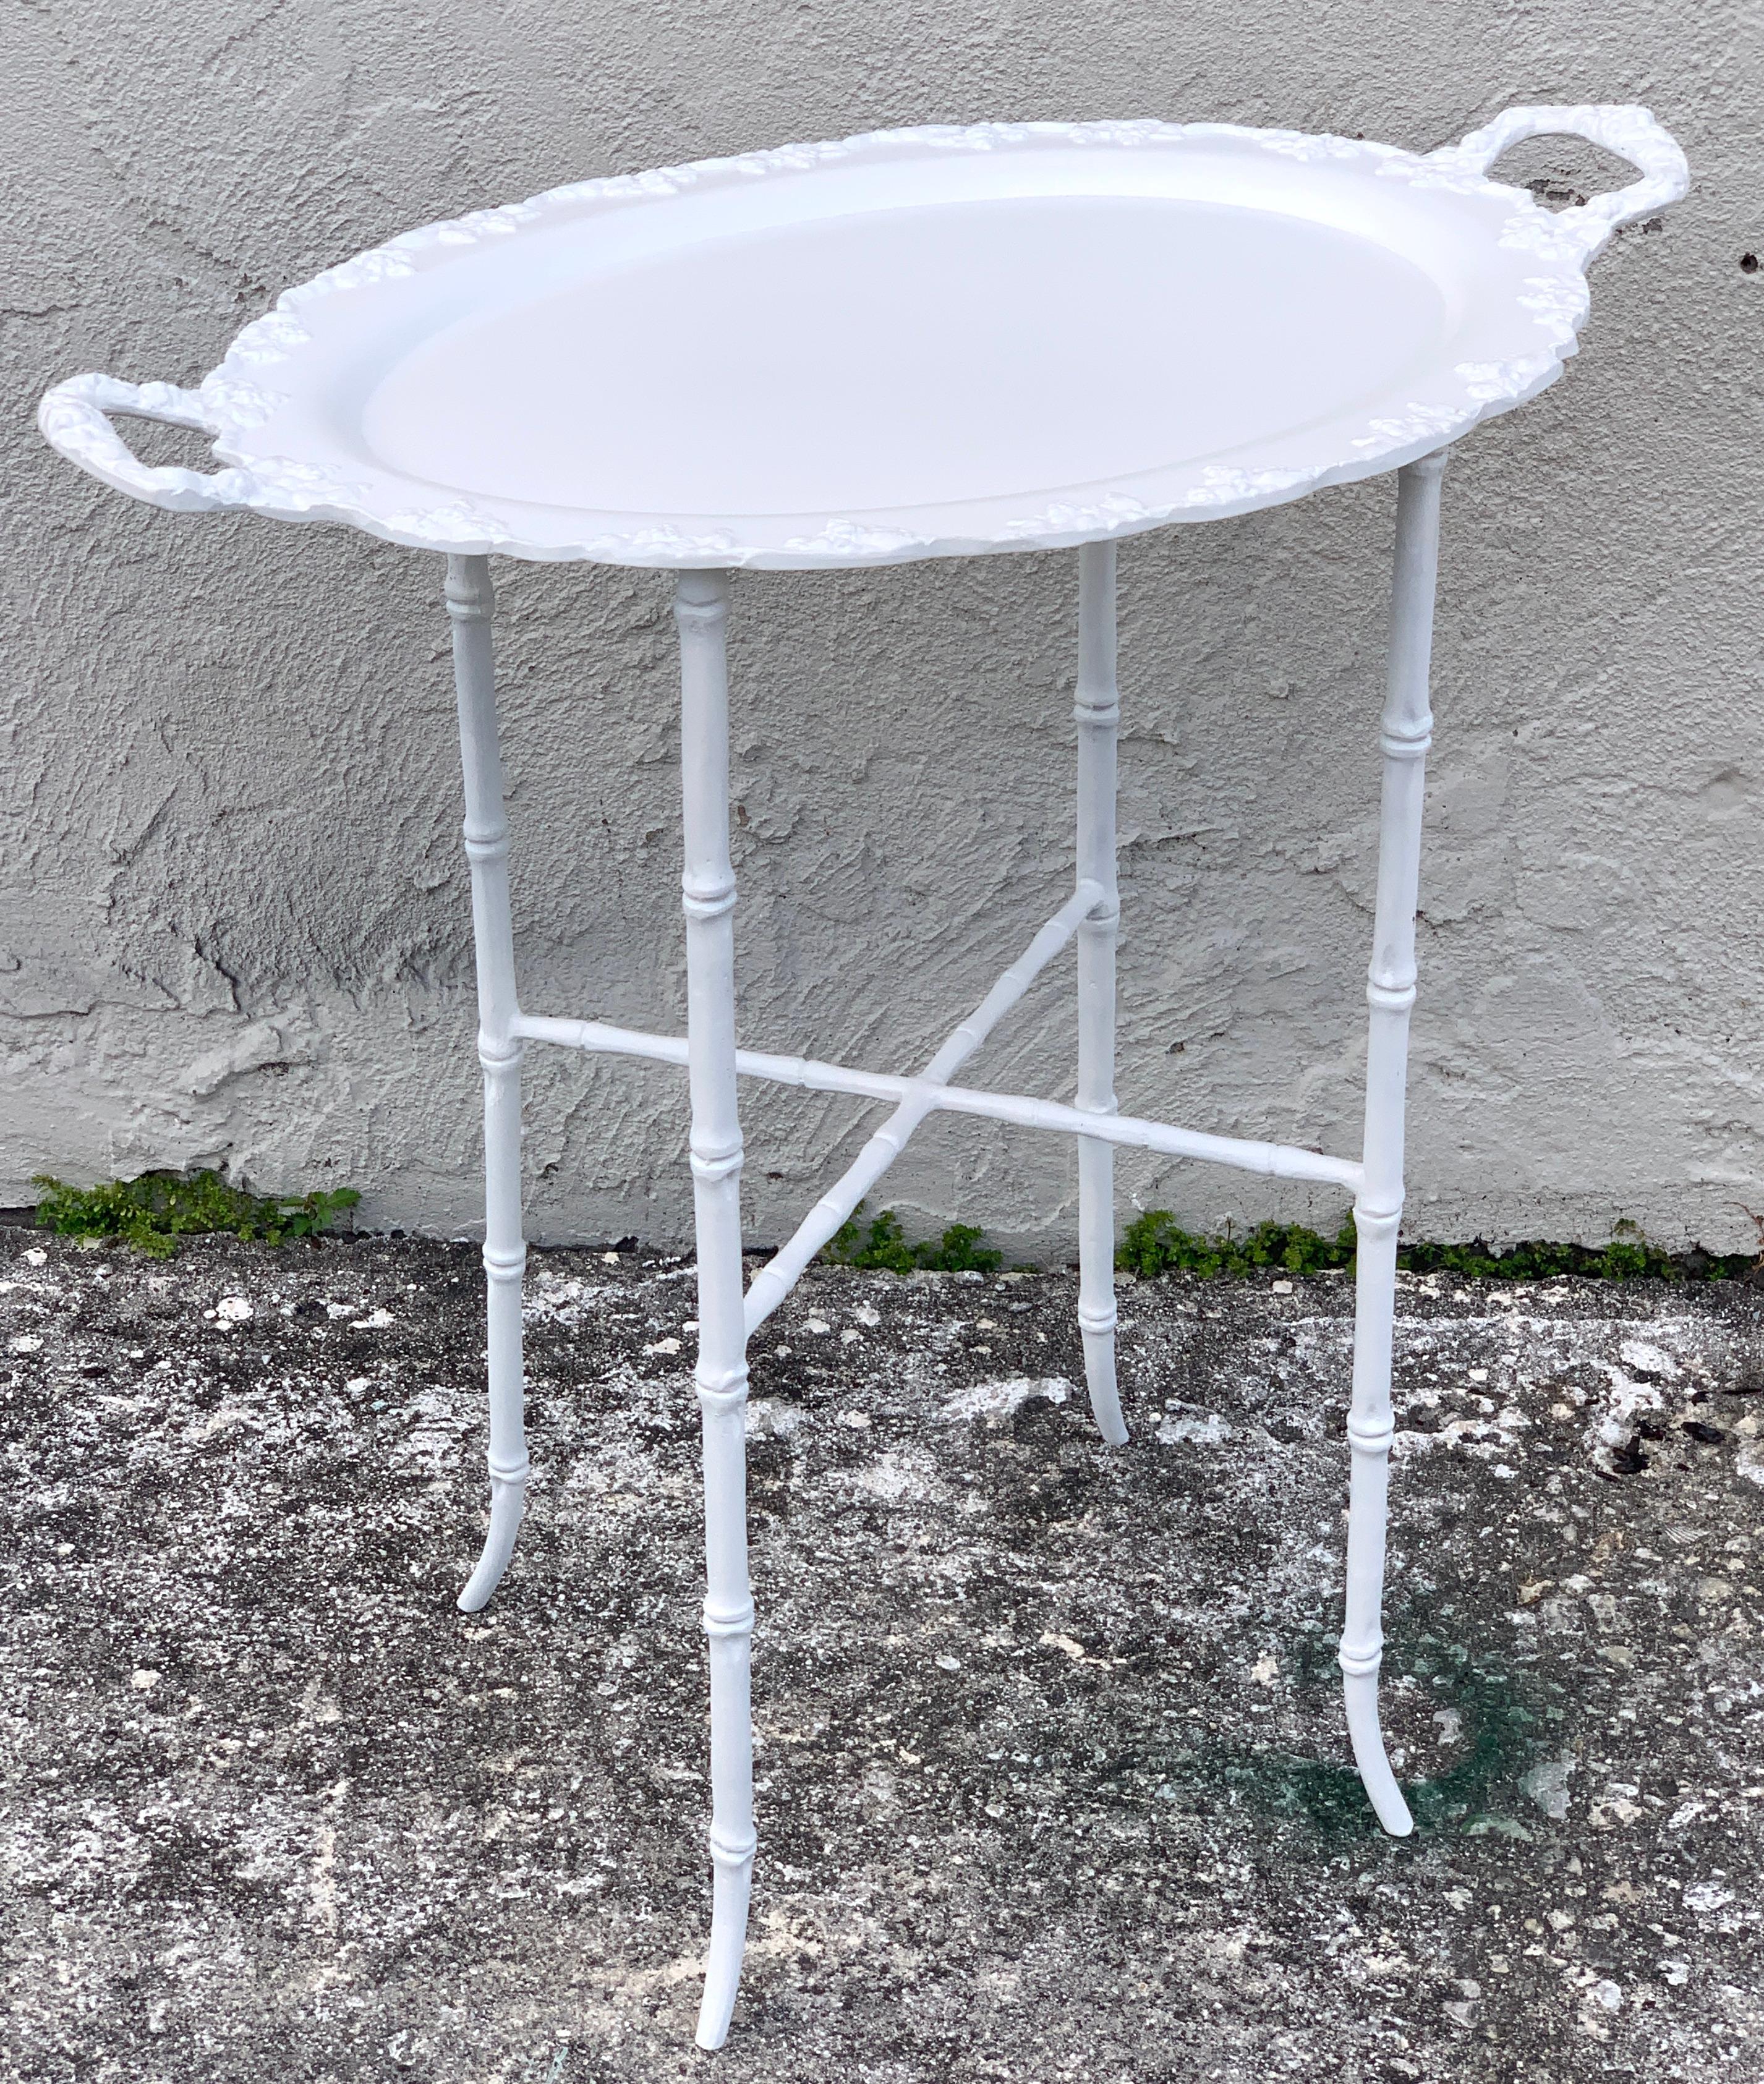 Faux Bamboo and Grape Motif White Enameled Tray Table, Provenance Celine Dion 1